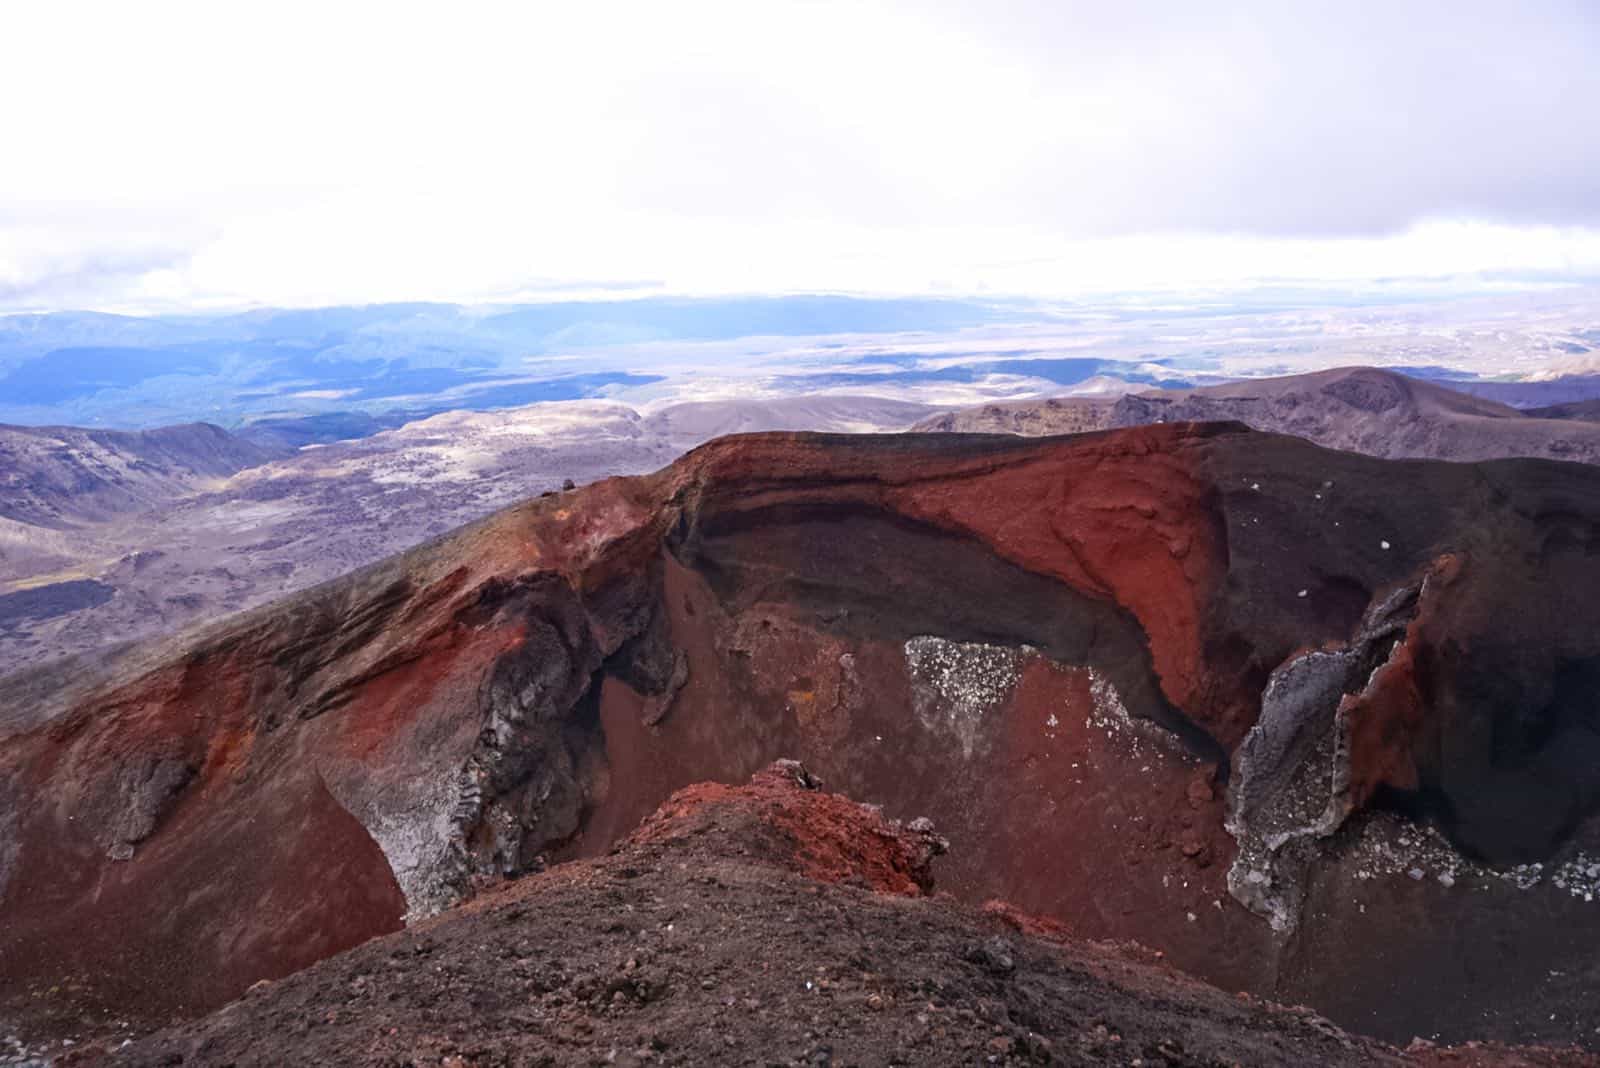 Tongariro Crossing is a truly spectacular hike with once-in-a-lifetime views